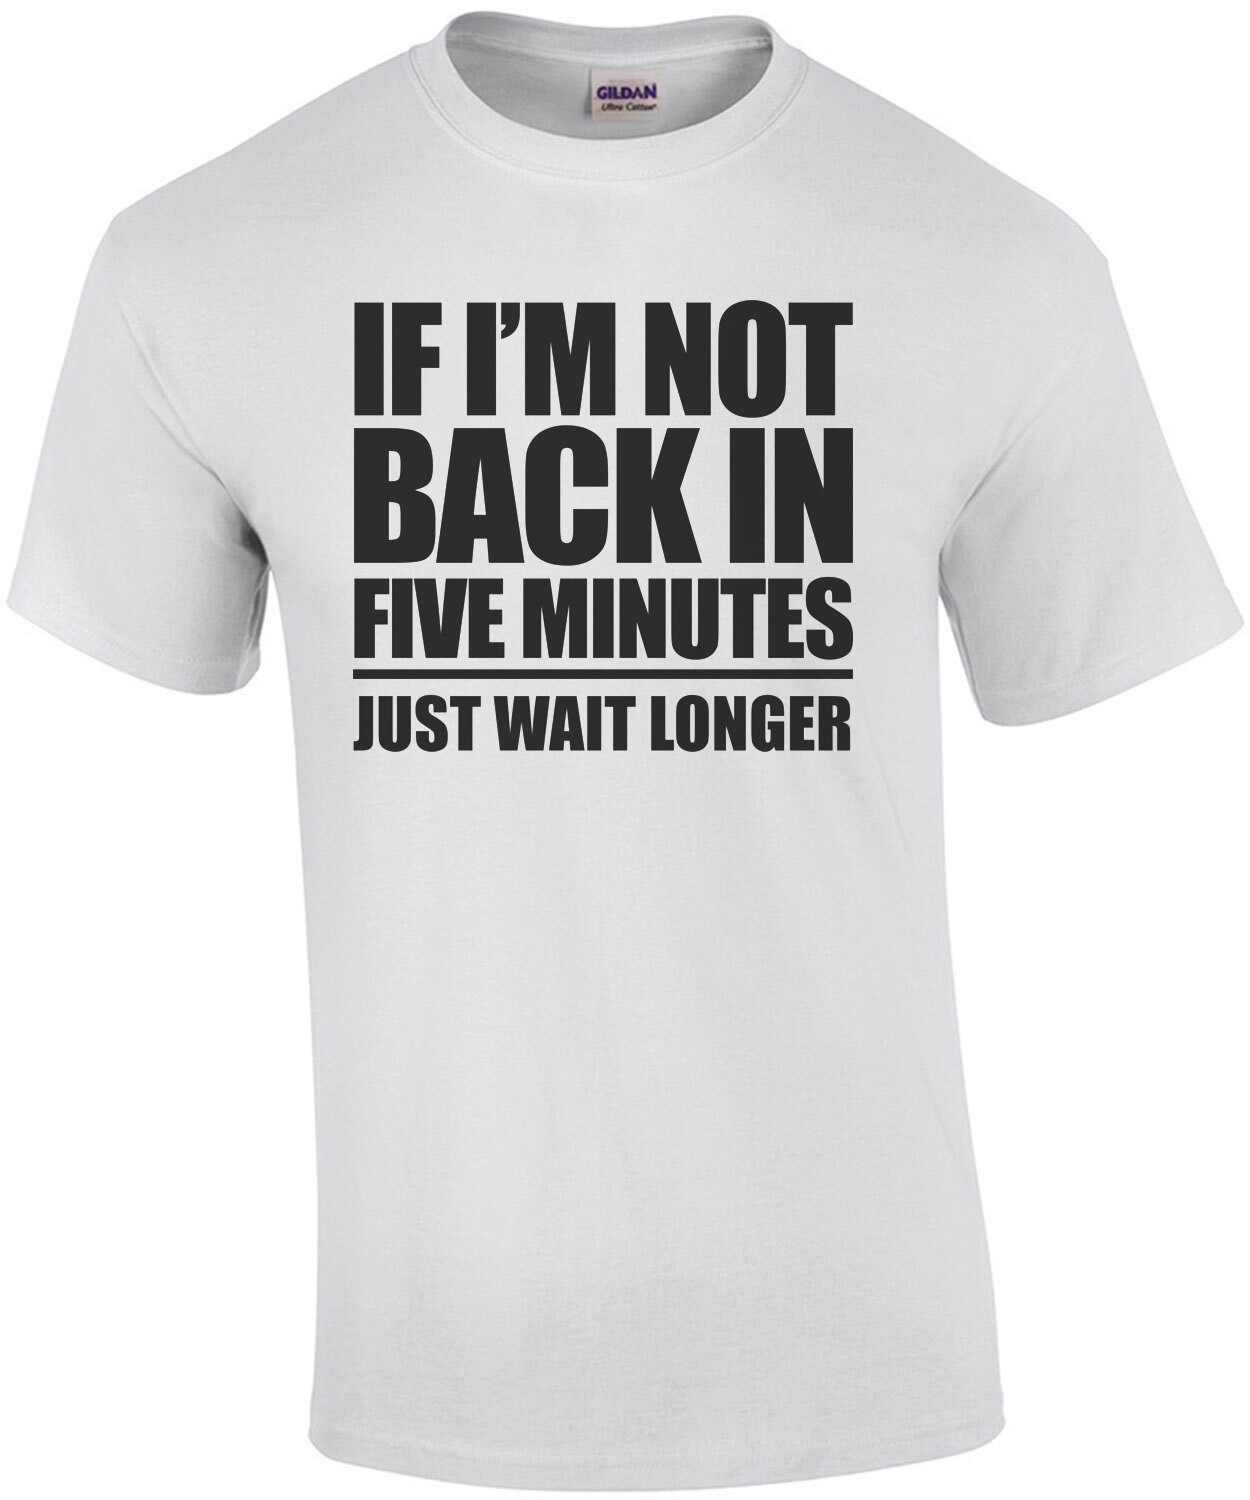 If I'm not back in five minutes - just wait longer - funny t-shirt